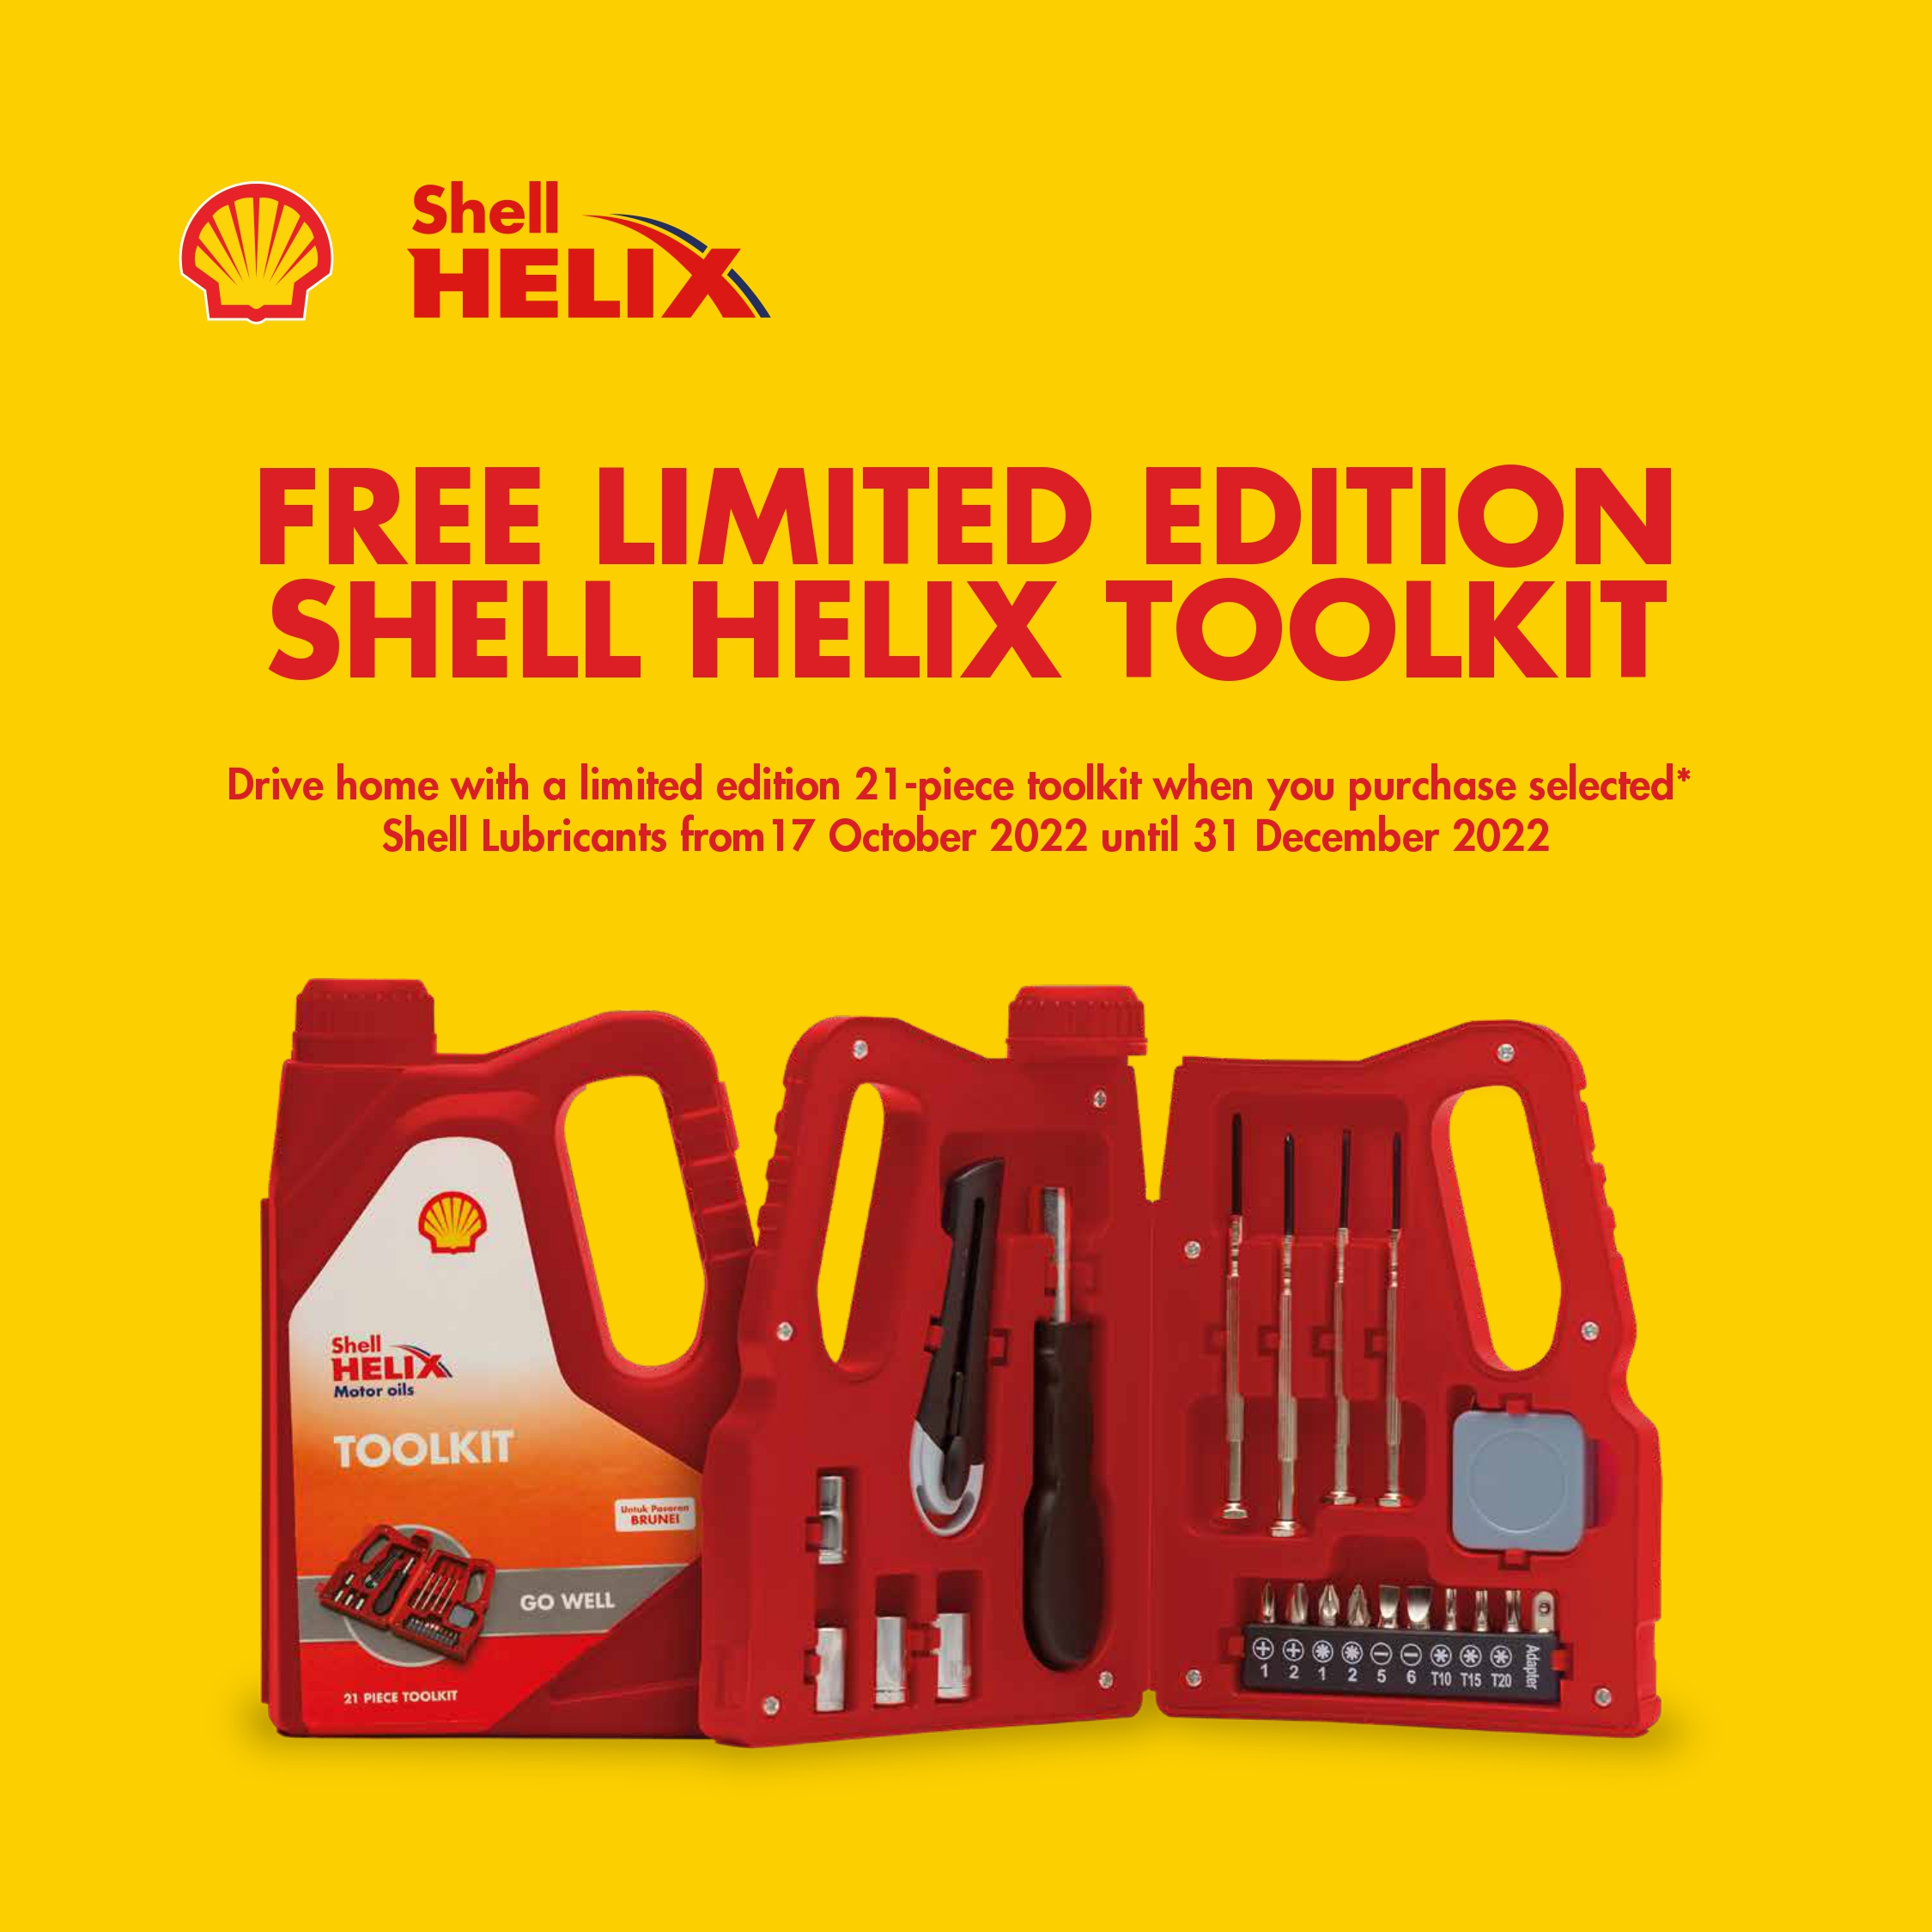 BSM SHELL HELIX TOOLKIT SOCMED V4 page 0001